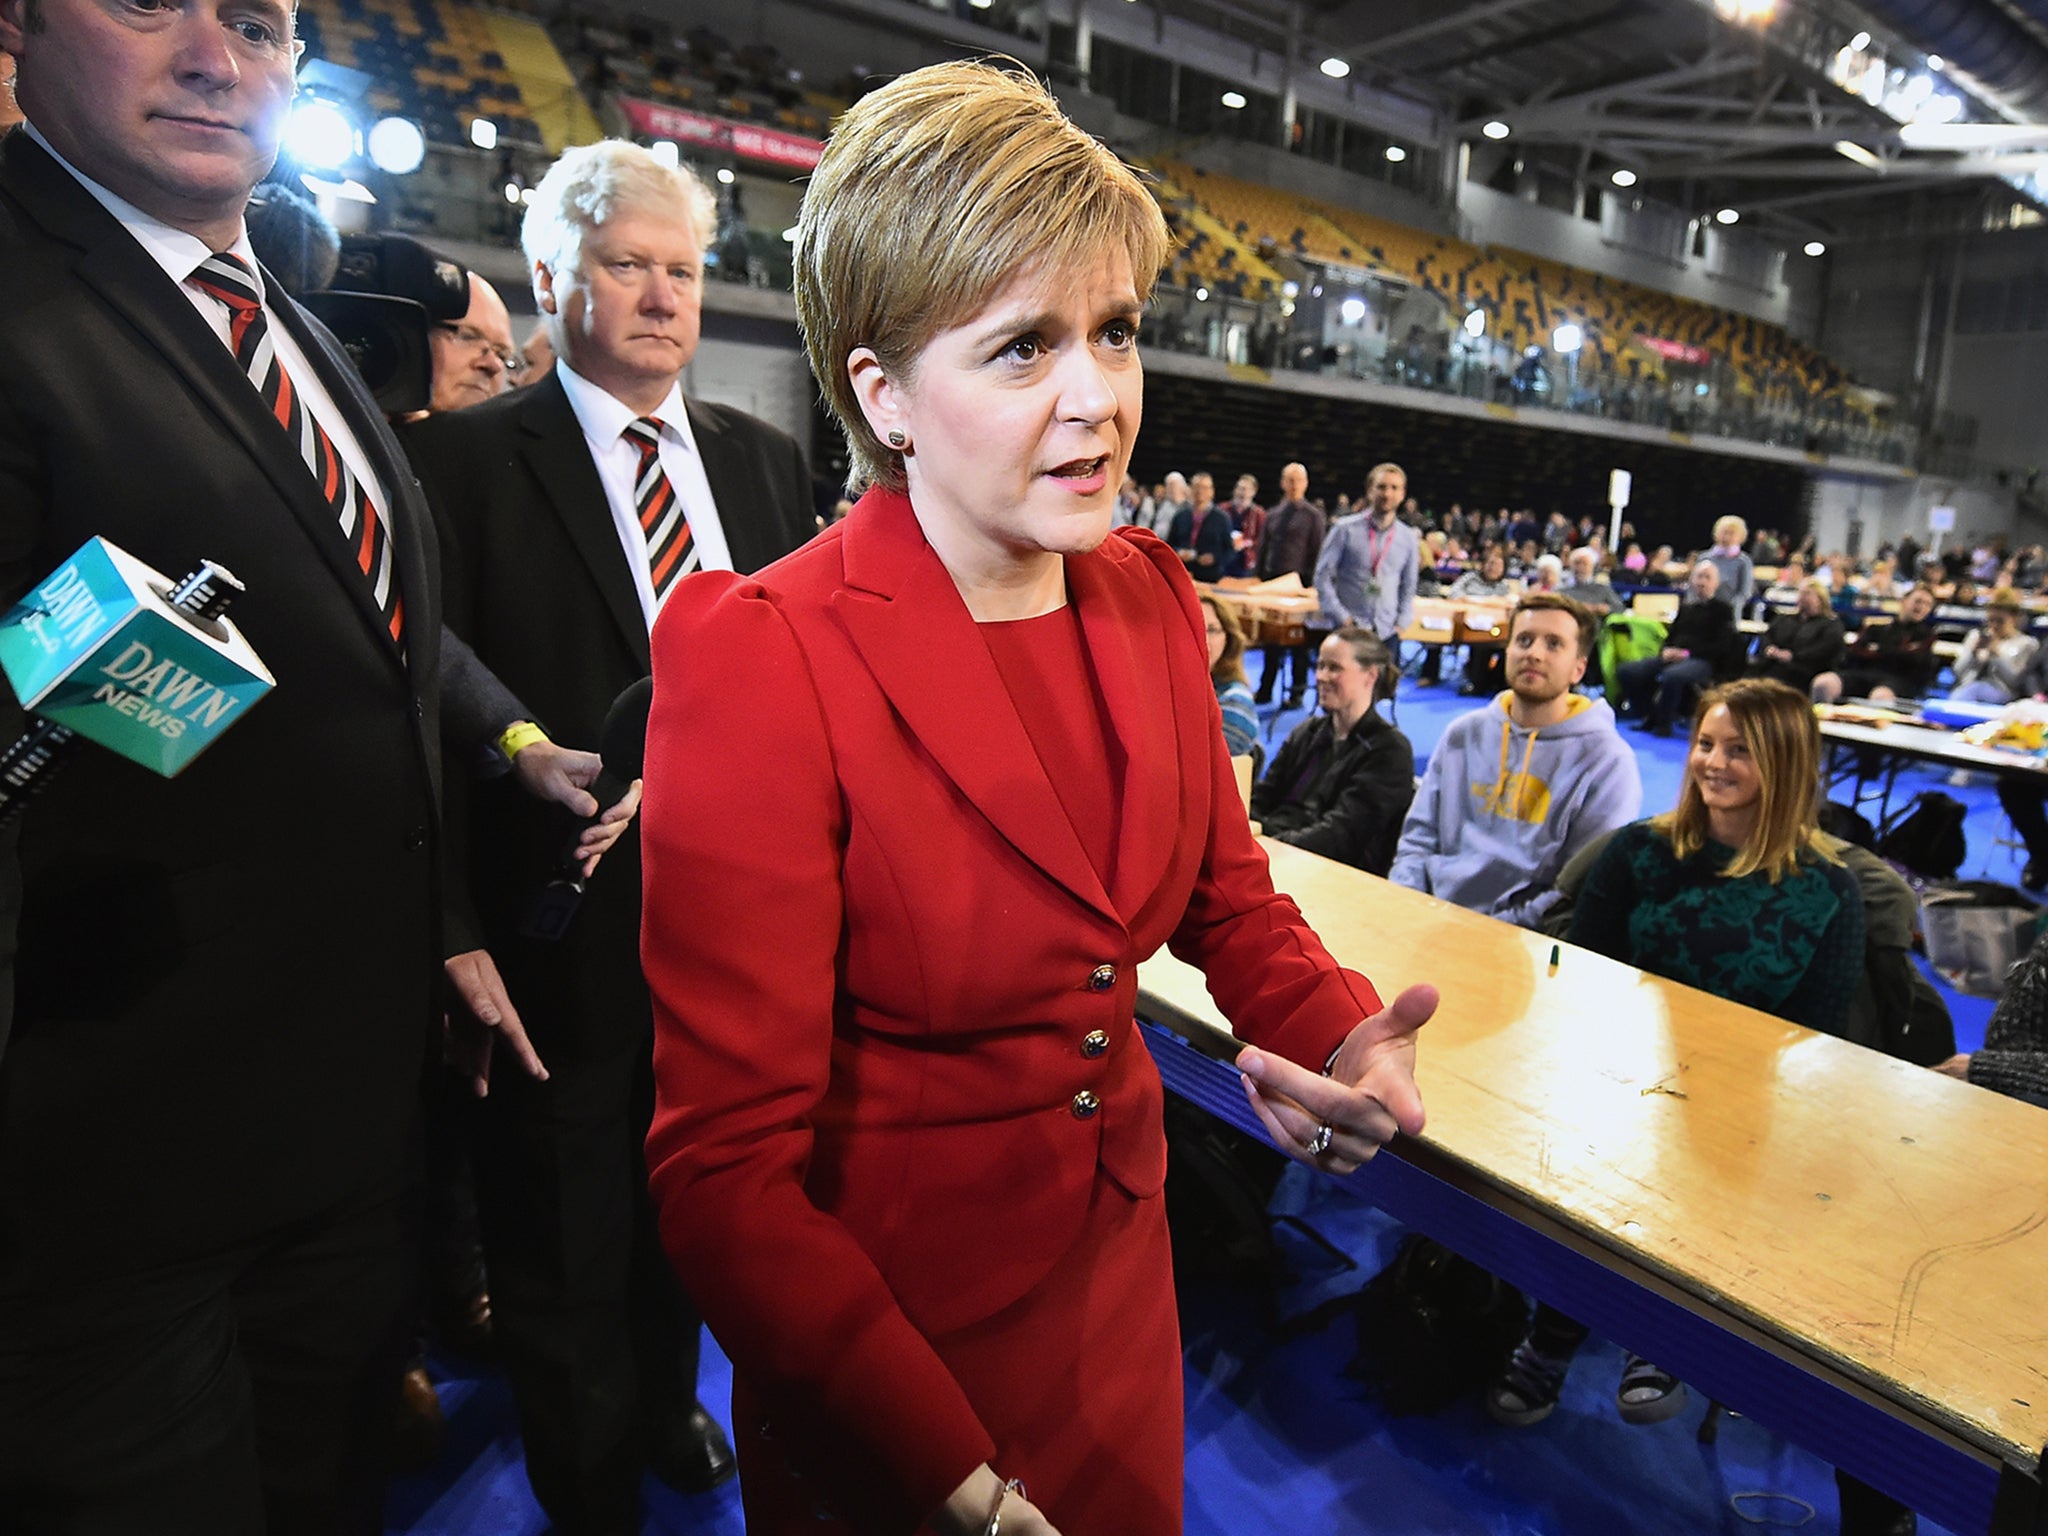 SNP leader Nicola Sturgeon told supporters that they had 'made history' with the result